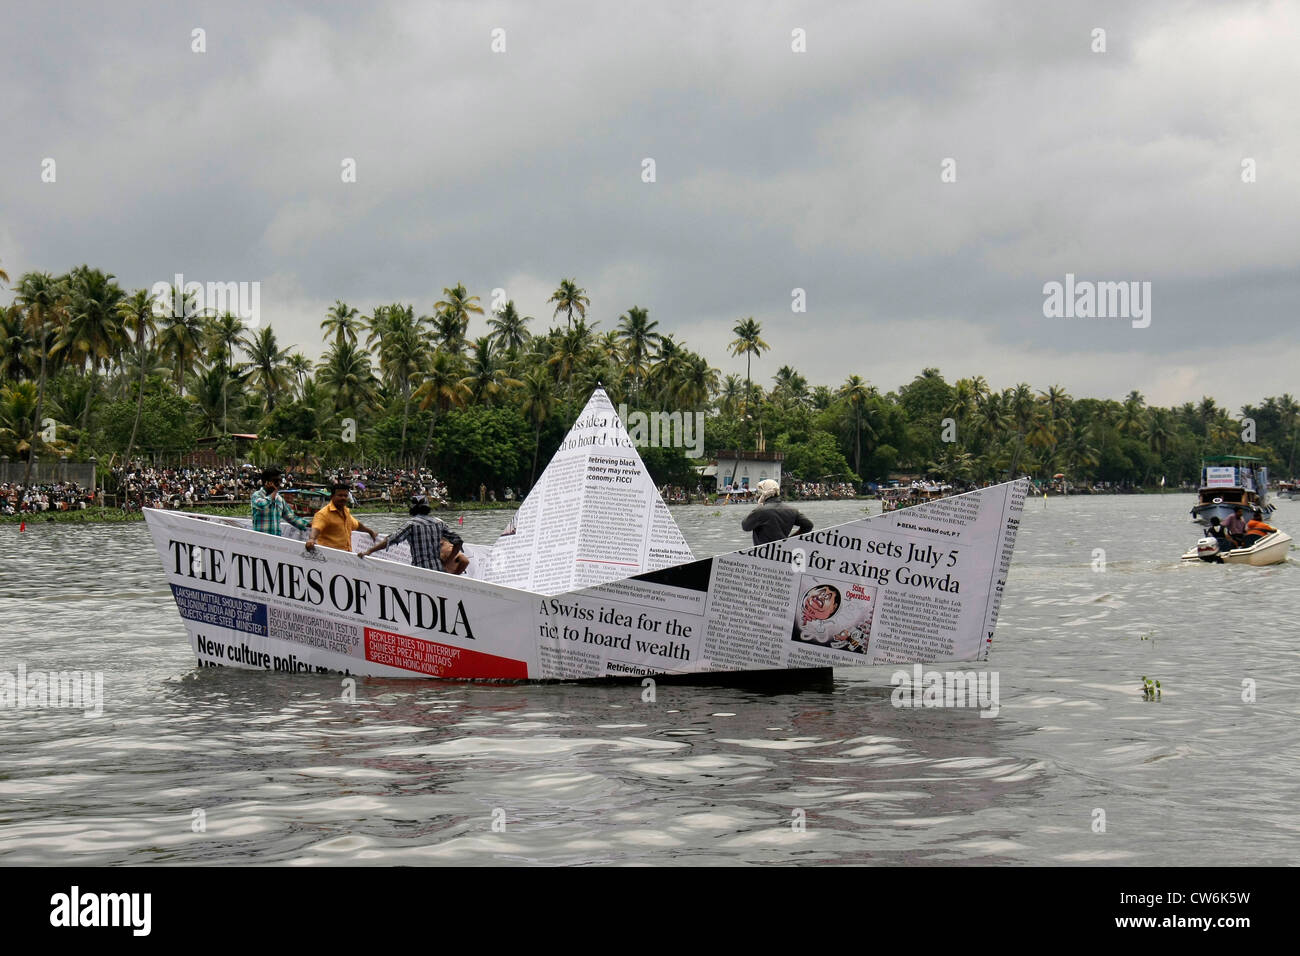 strange unusual funny news paper boat in water during nehru trophy snake boat race in alappuzha formerly alleppey,kerala,india,pradeep subramanian Stock Photo